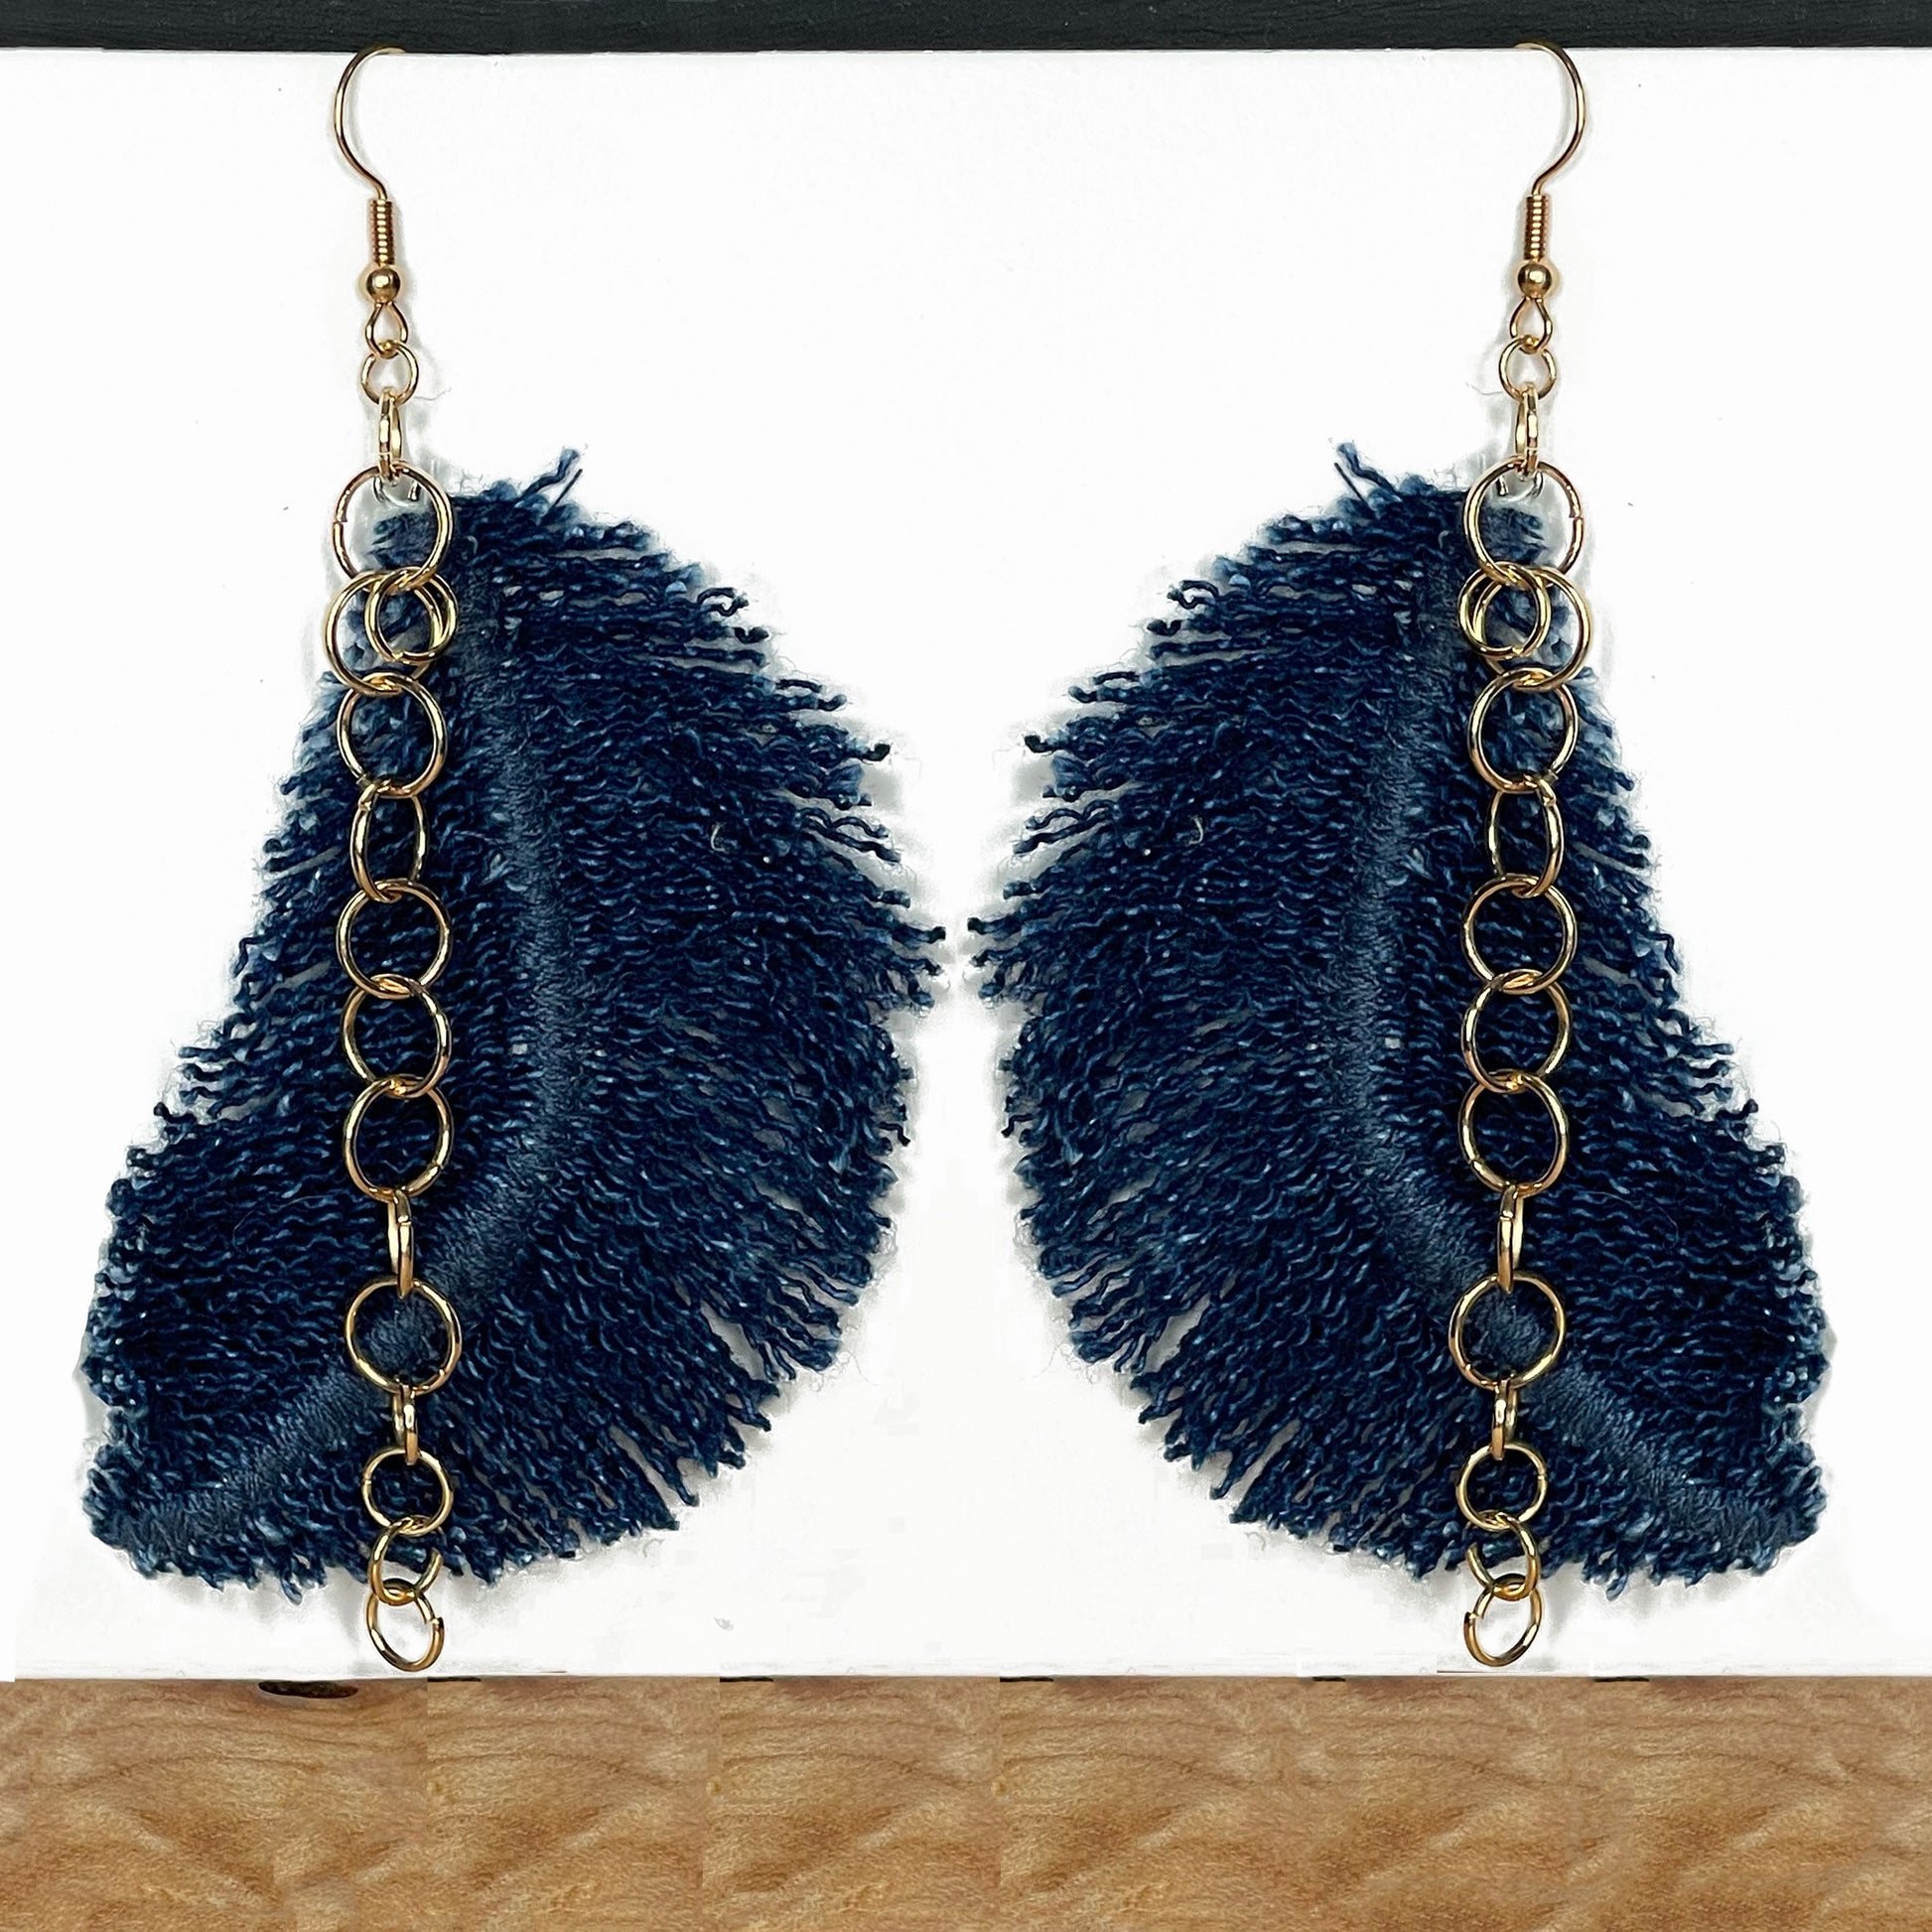 handmade unique feather earrings, unique boho jewelry, made from recycled materials and chains, completely one of a kind jewelry made by local brooklyn desig